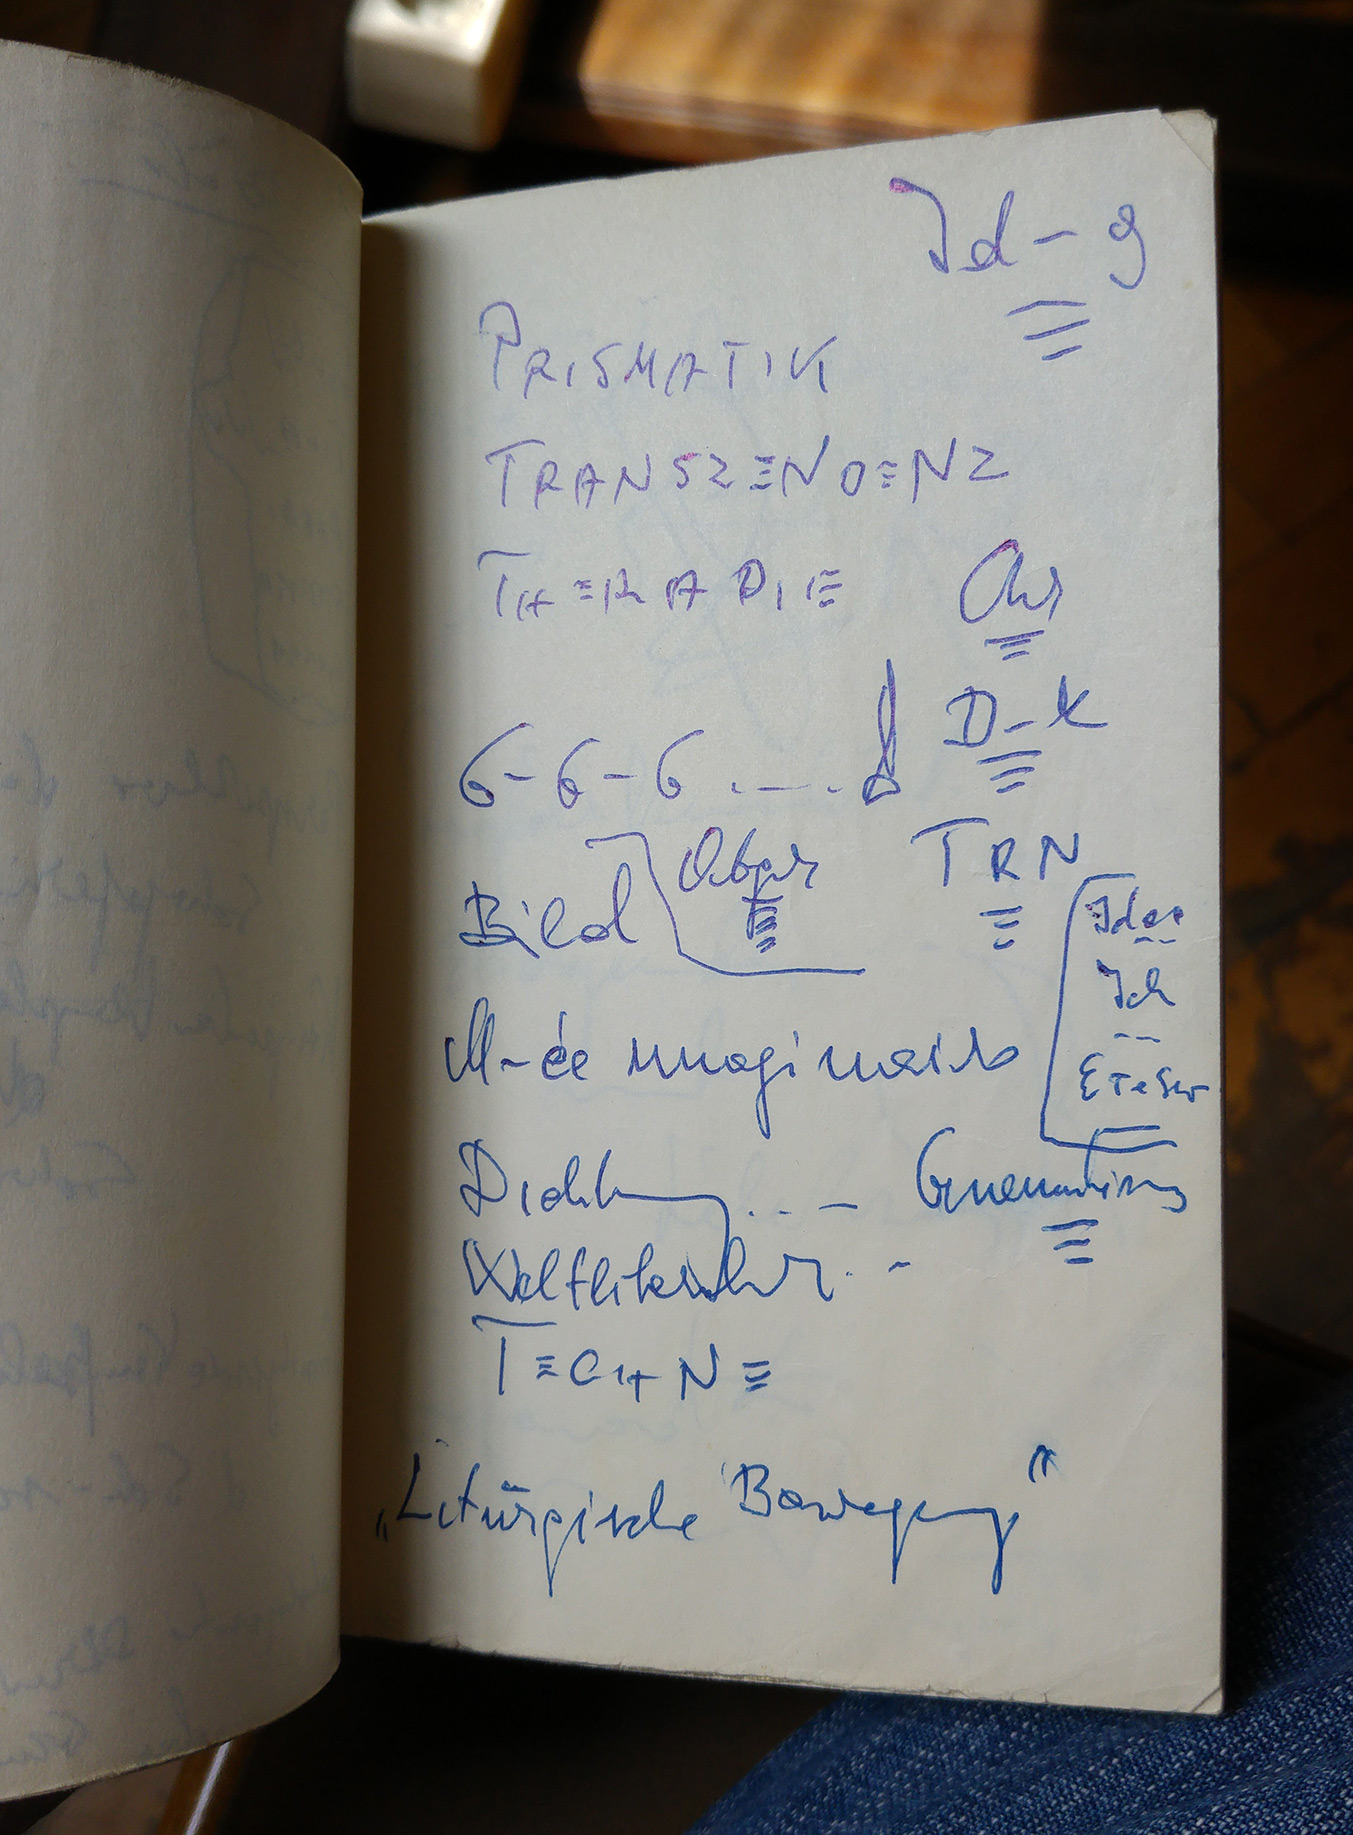 A page from the notebooks of Lajos Szabó created during his emigration years.